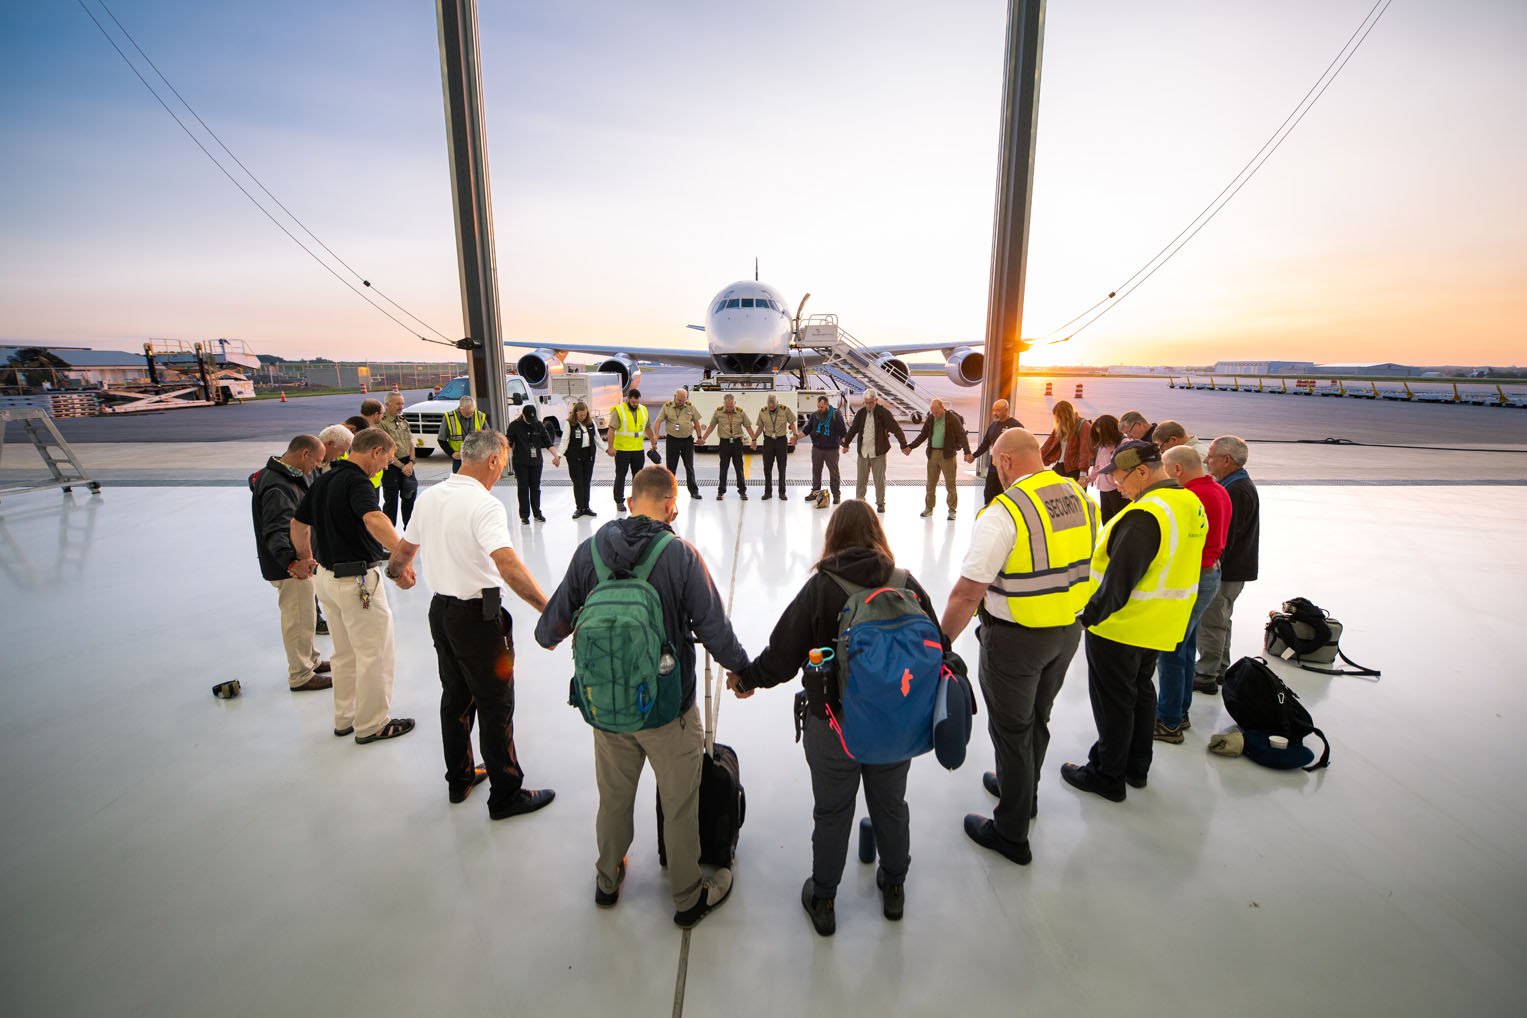 Ground and flight crews joined in prayer with relief teams.